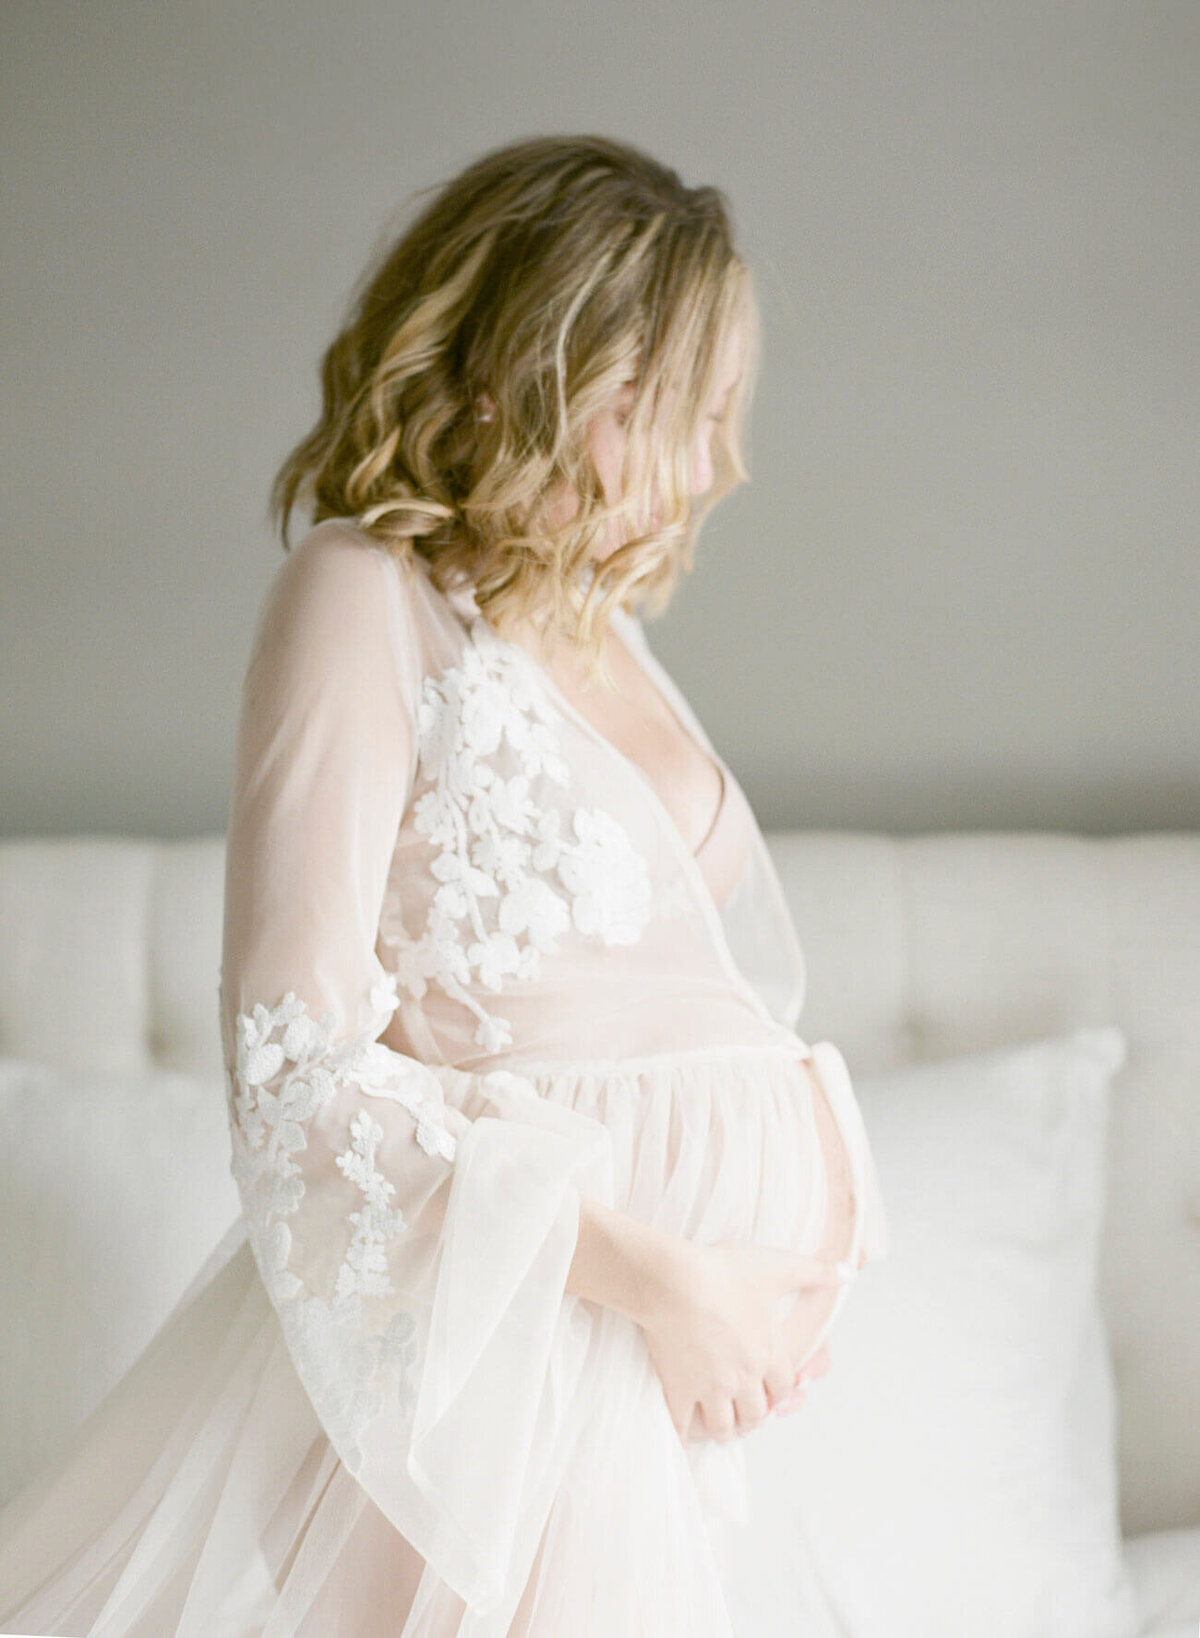 cristina-hope-photography-maternity-gown